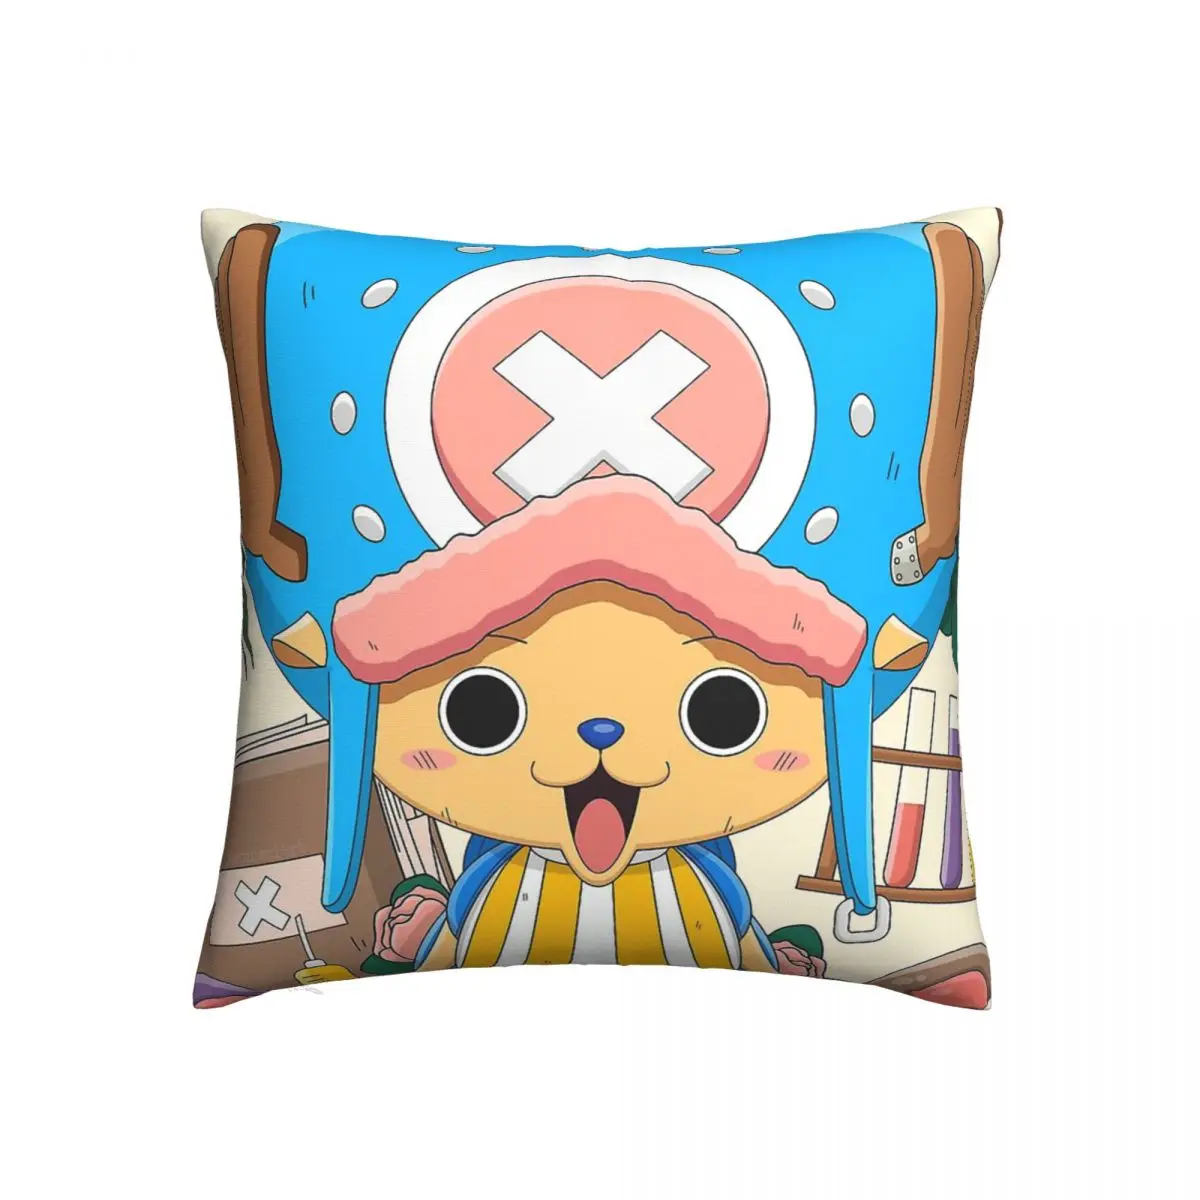 Chopper Throw Pillow Case One Piece Hot Anime Backpack Cushions Covers DIY Printed Washable Sofa Decor